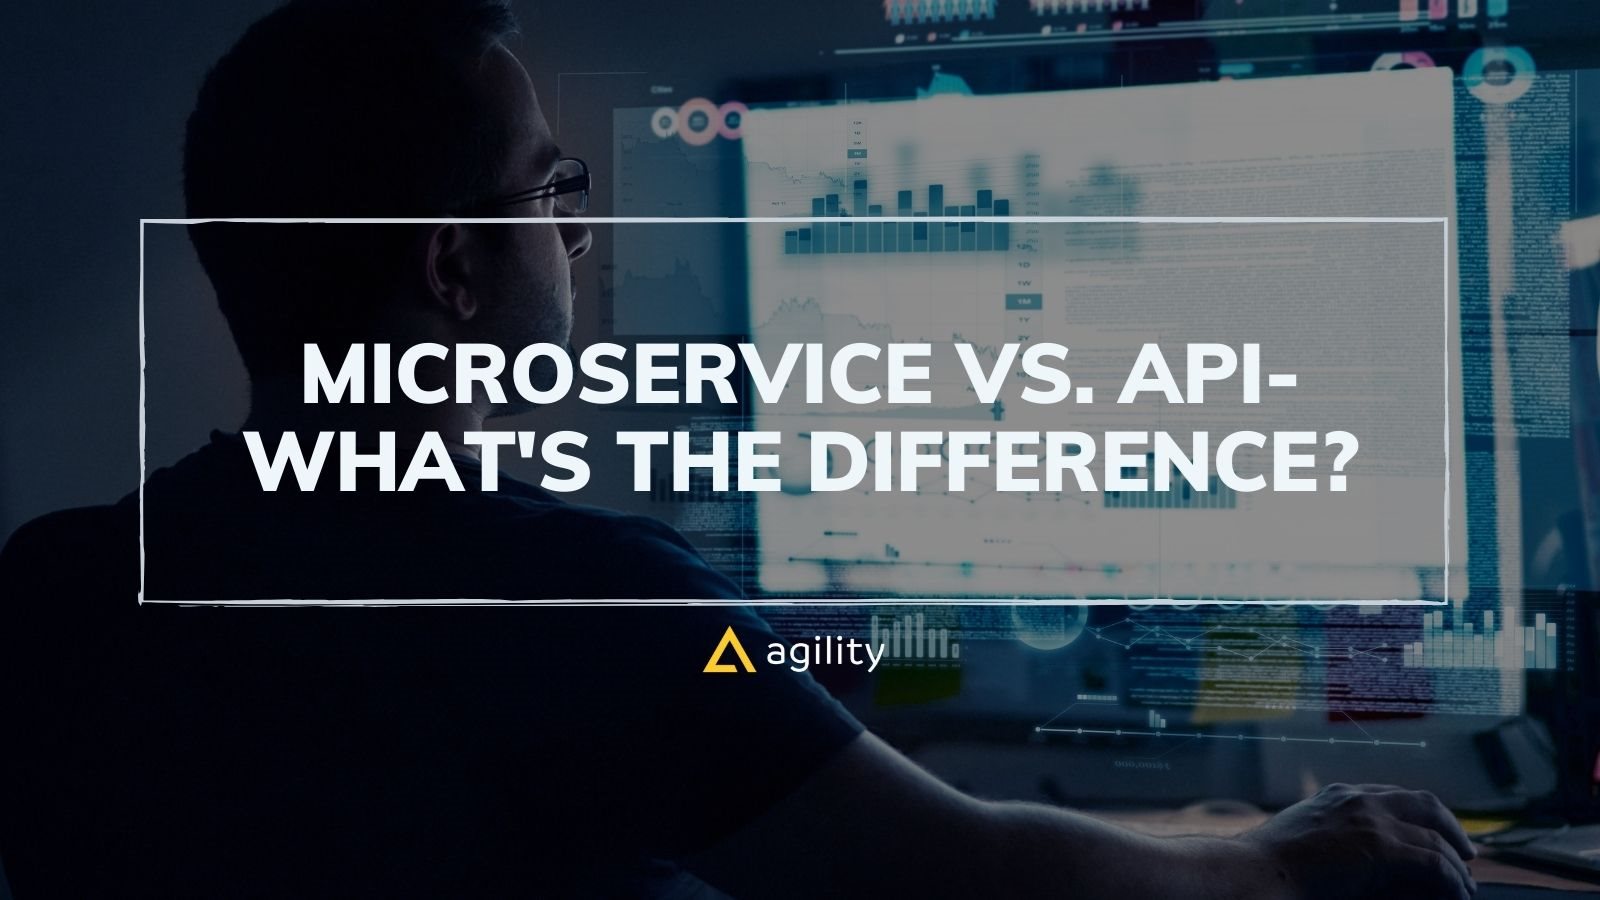 Microservice vs. API- What's the difference?